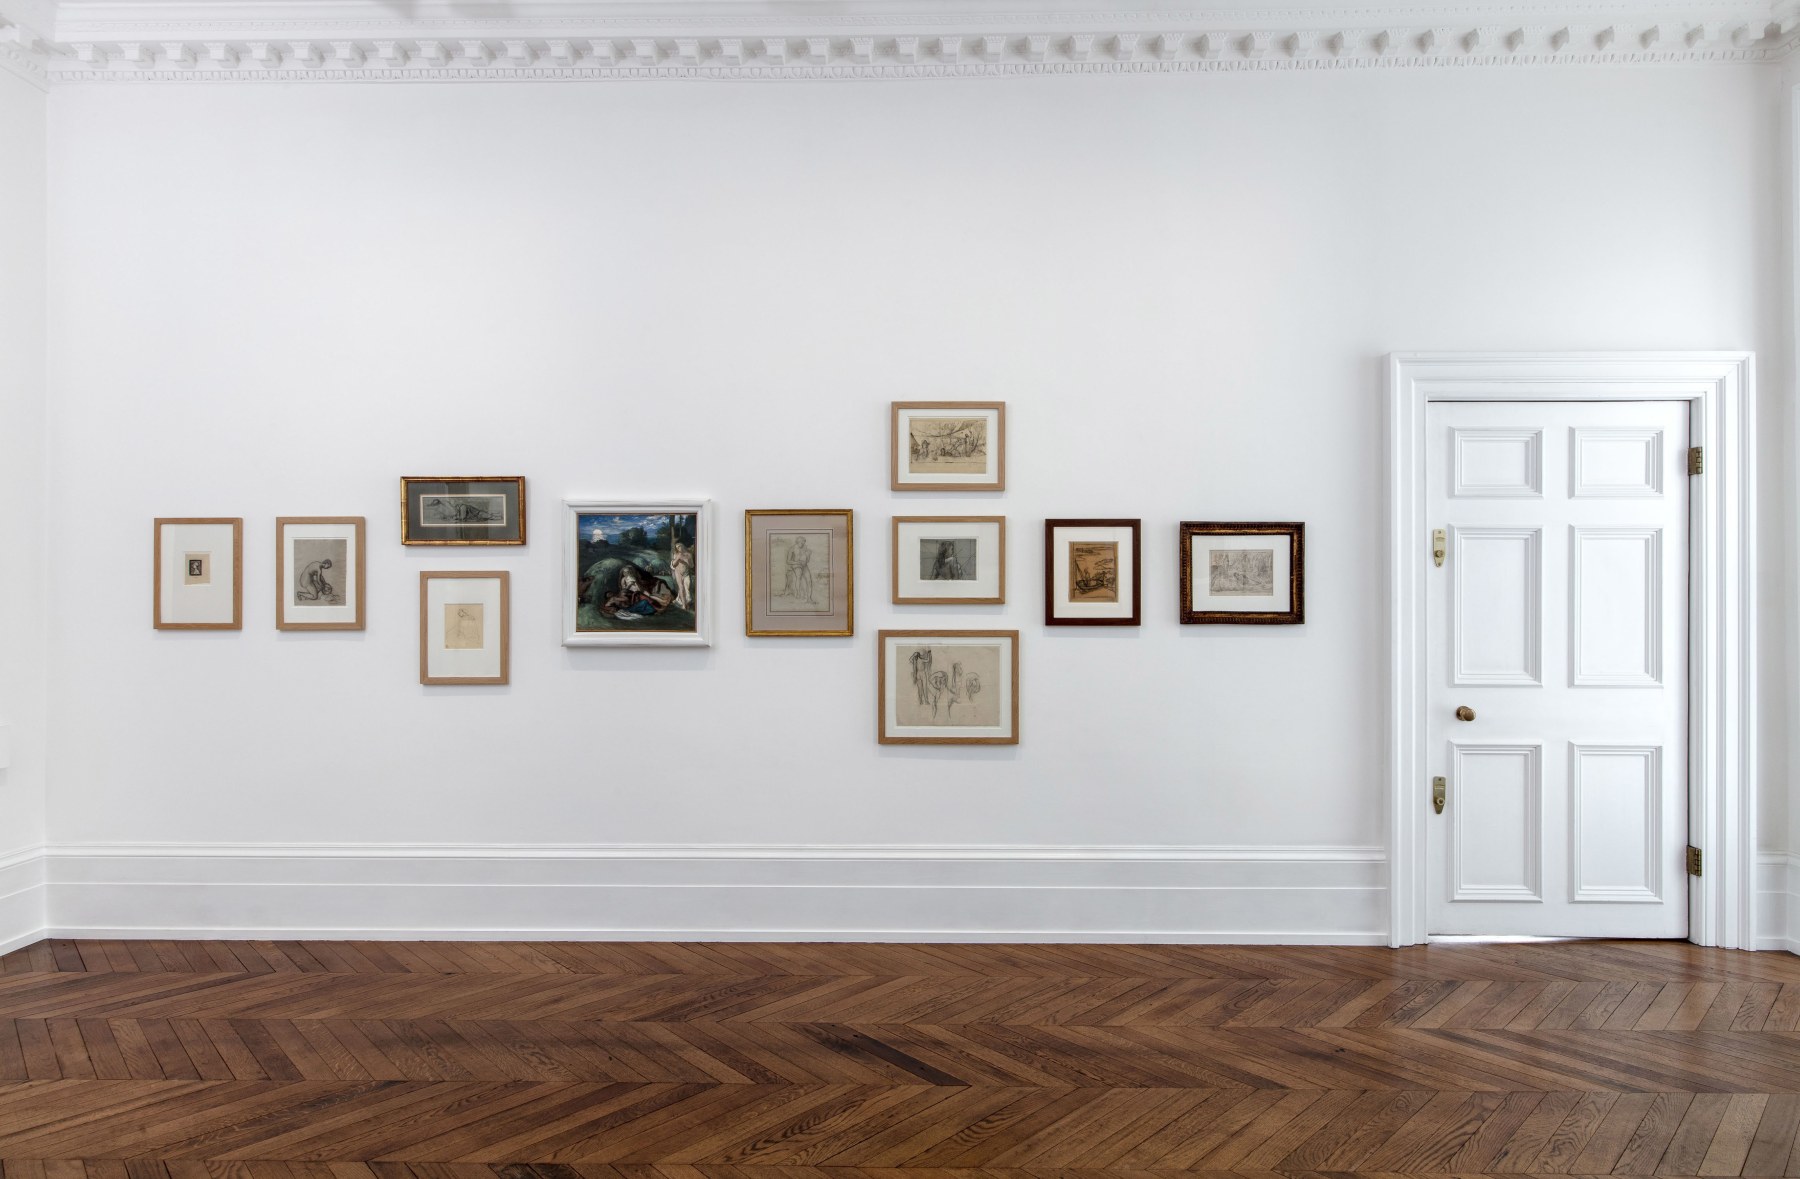 PIERRE PUVIS DE CHAVANNES, Works on Paper and Paintings, London, 2018, Installation Image 5